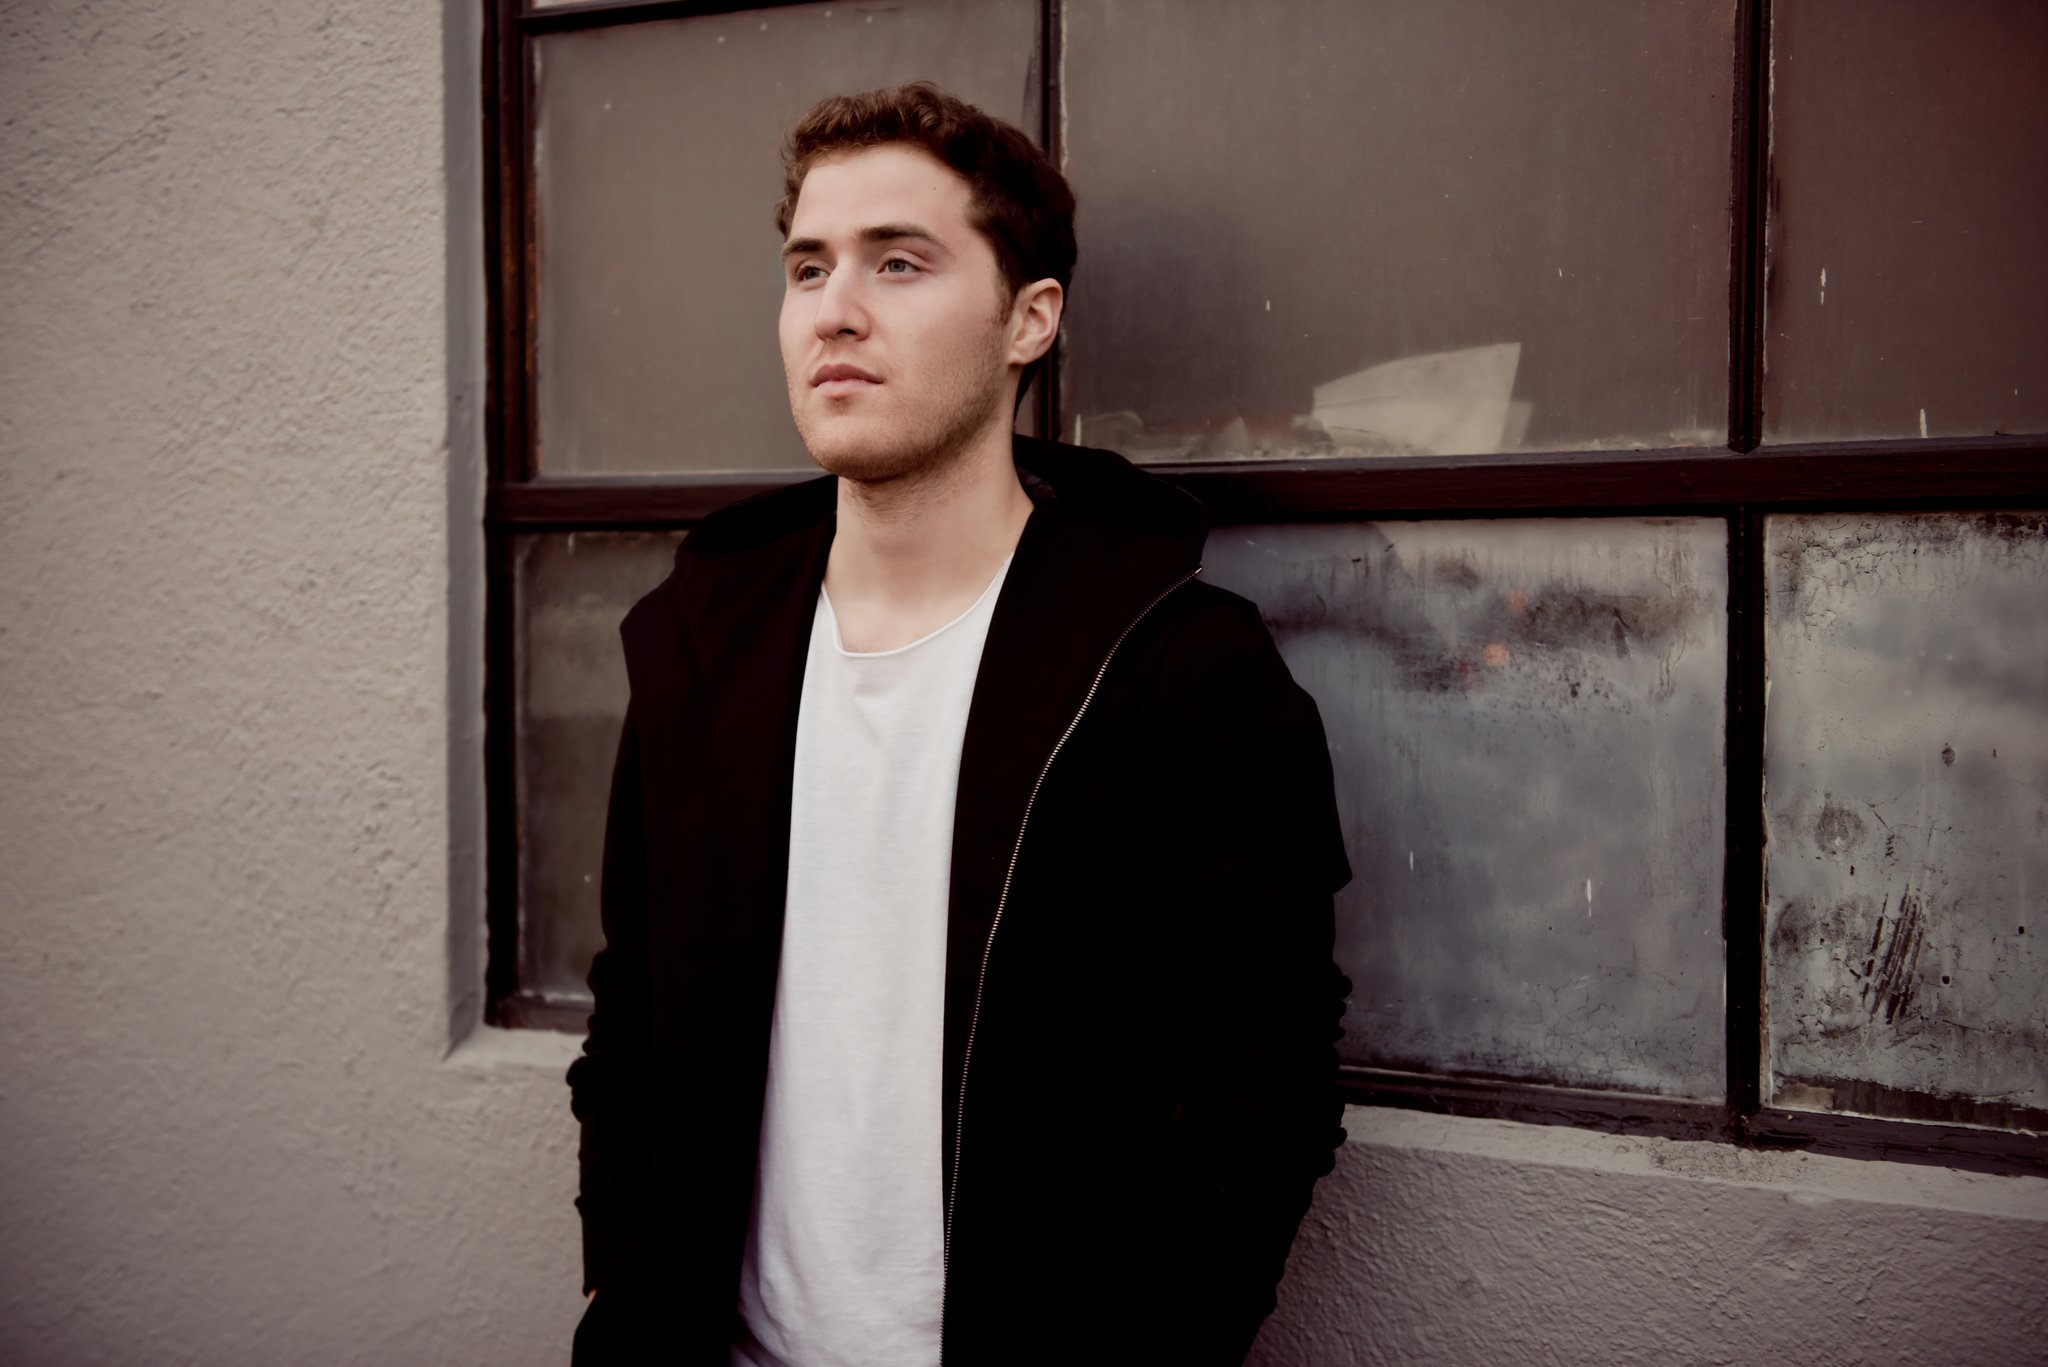  Mike Posner for Island Records - Winter 2015
Myspace.com
Photo credit: Meredith Truax 
